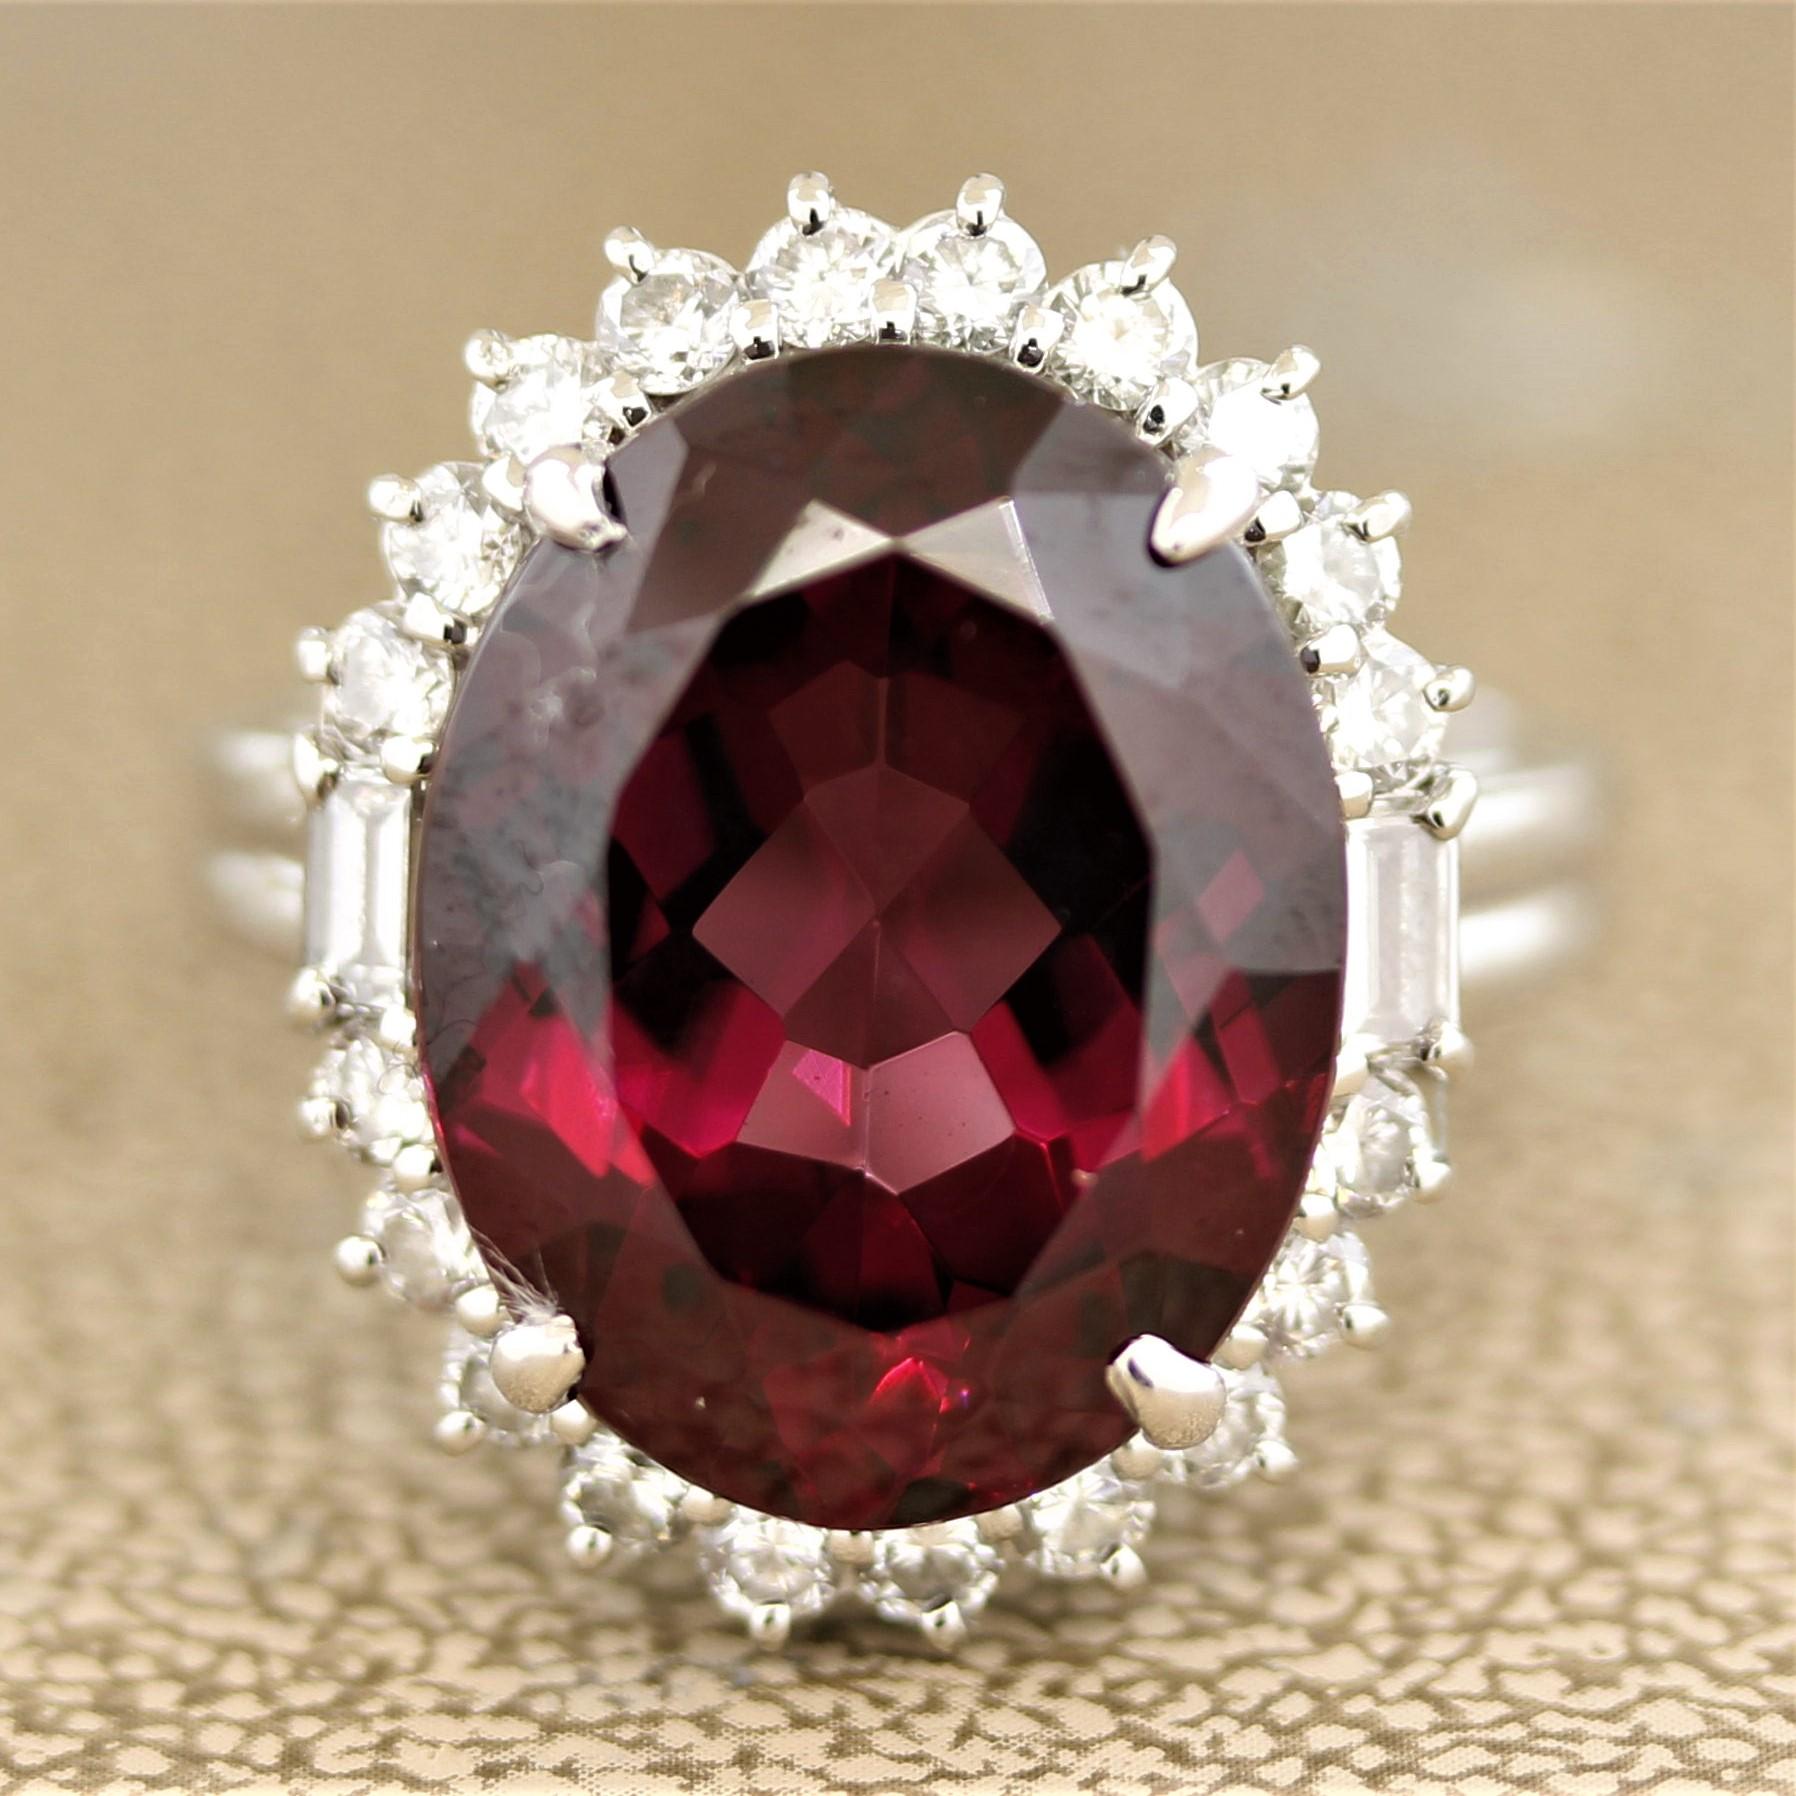 Simply stunning. The ring features a superb gem of a gem rhodolite garnet weighing 13.14 carats. It has a bright and brilliant purple-red color that rivals the finest tourmalines and rubies. It is accented by 0.97 carats of round brilliant and